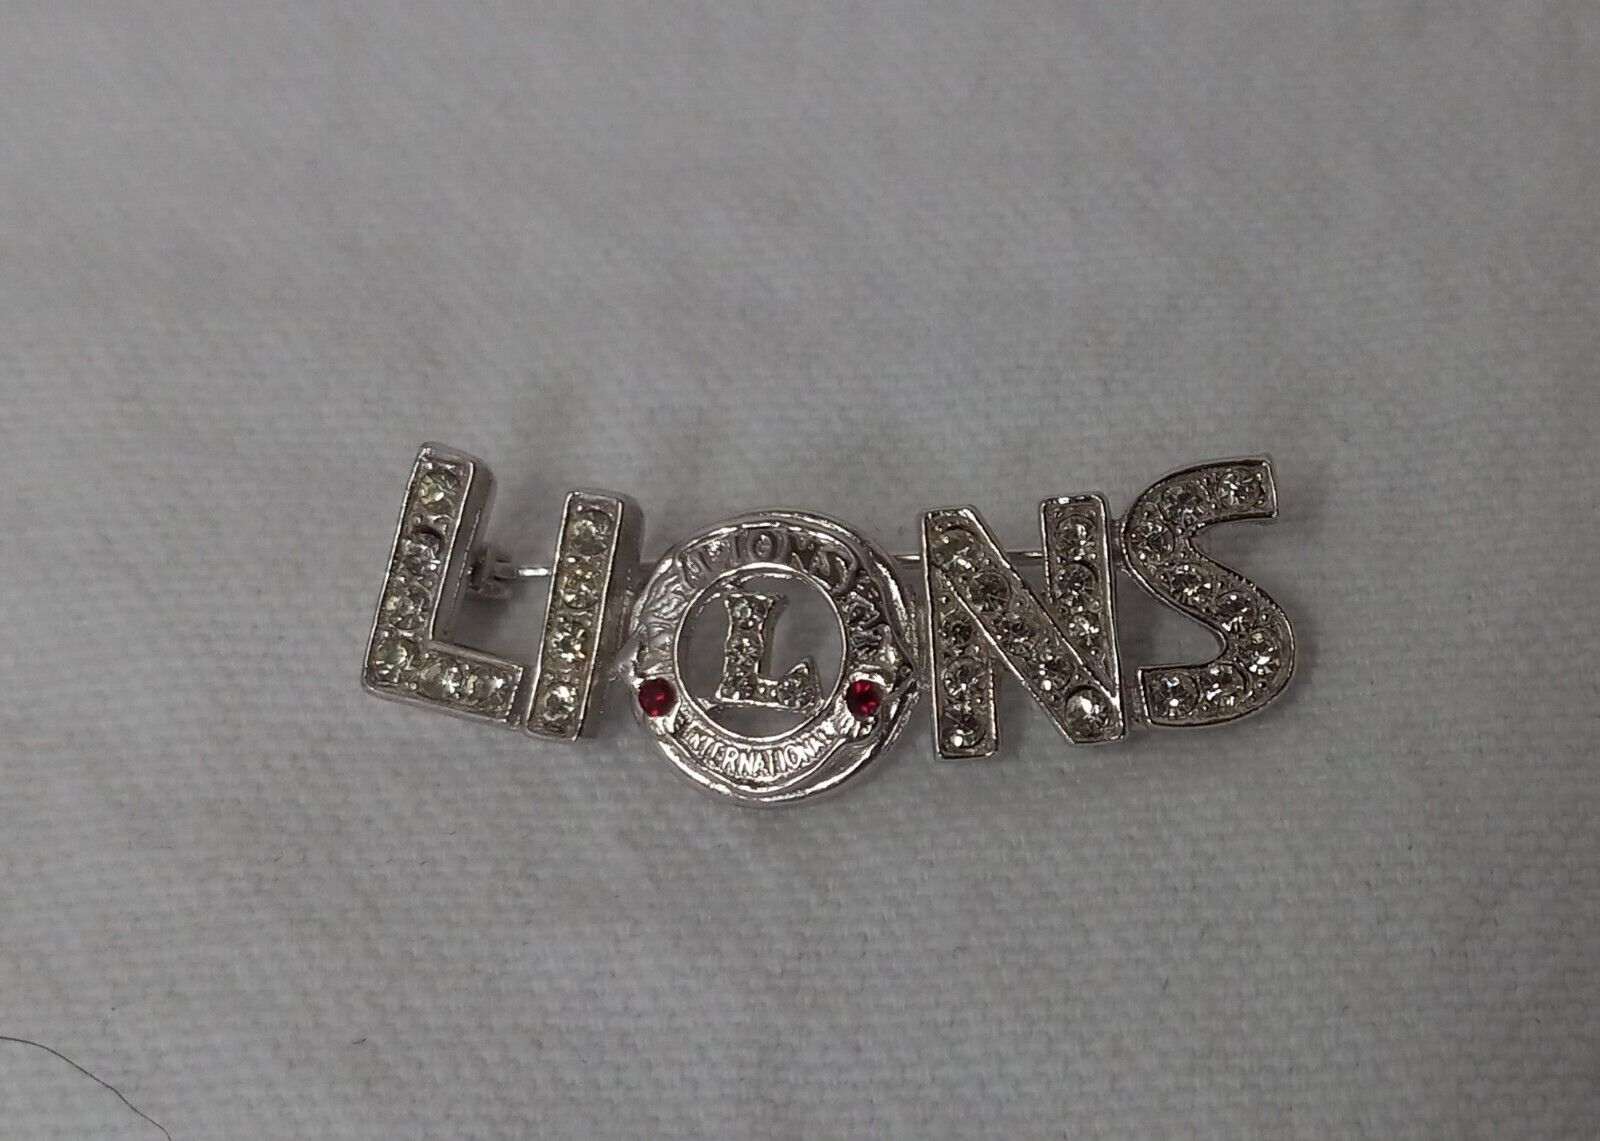 Vintage Lions International Club Silvertone Pin with Rhinestones 1.5 inches long